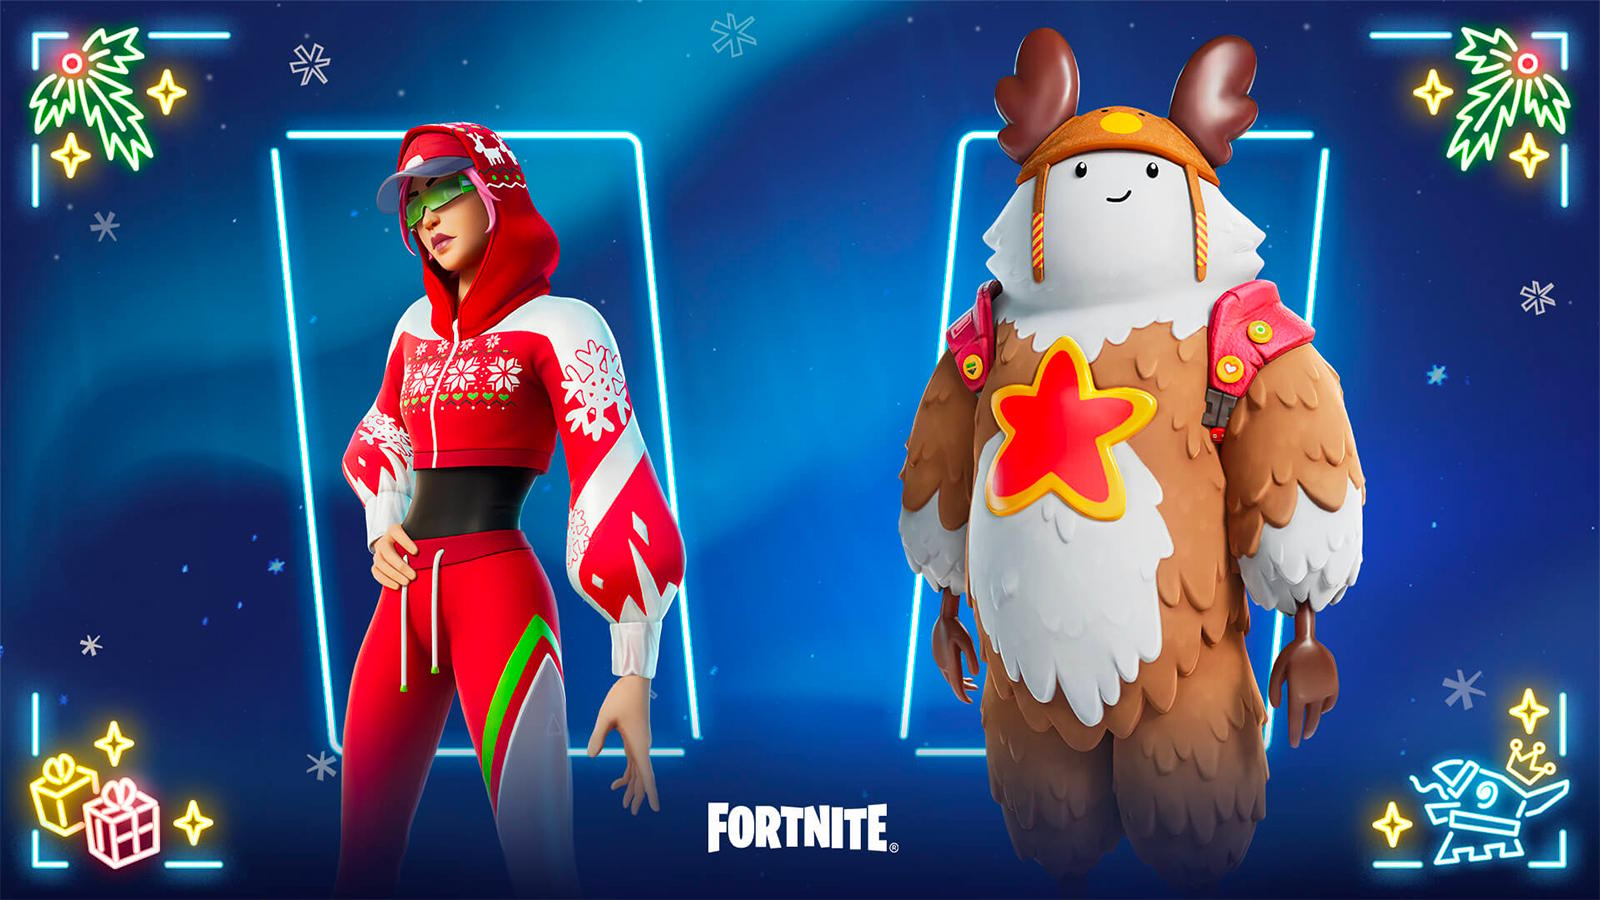 LEGO Fortnite skins: All outfits & how to get free LEGO Insiders skin